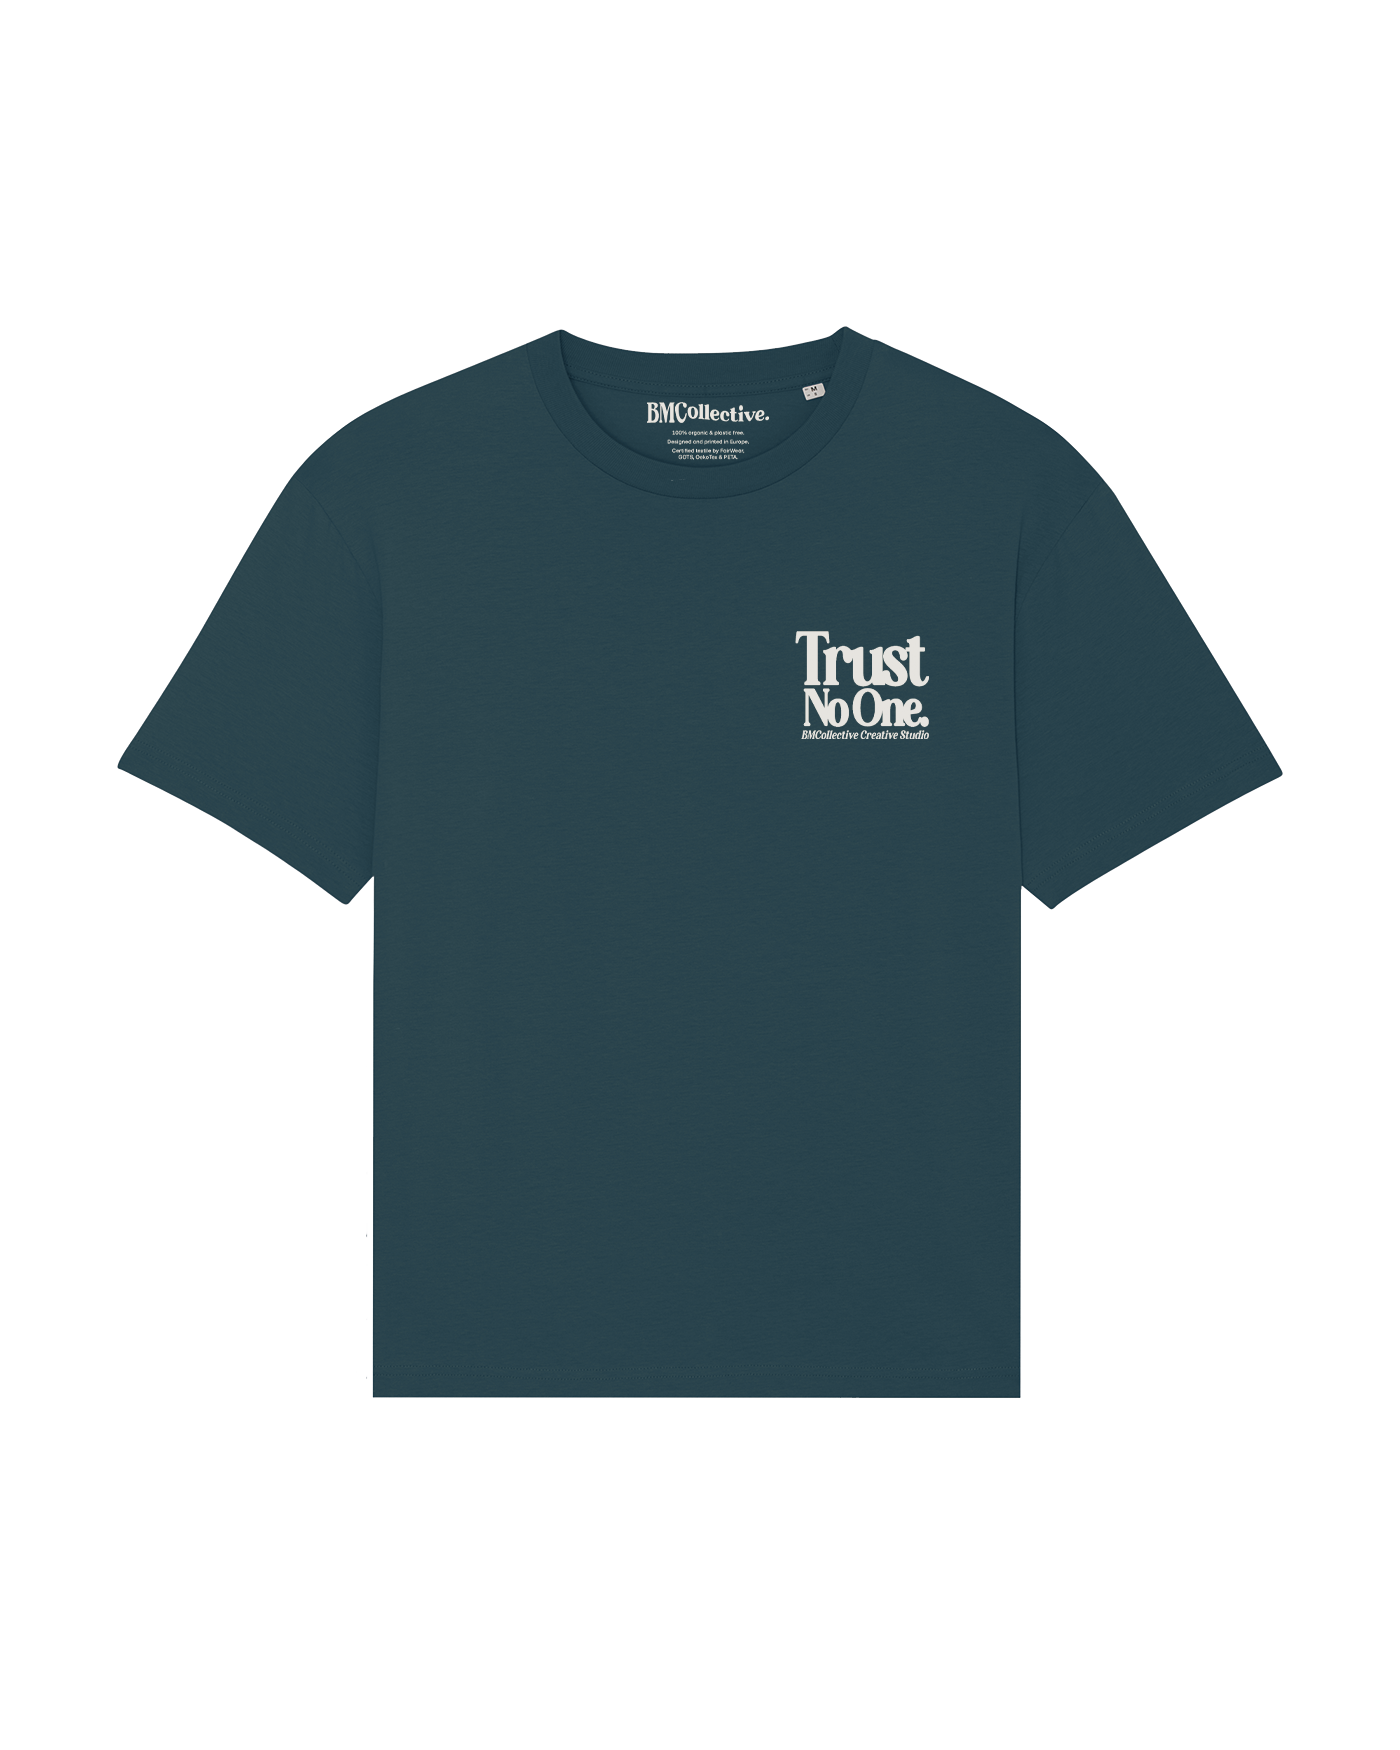 Trust No One Green Tee